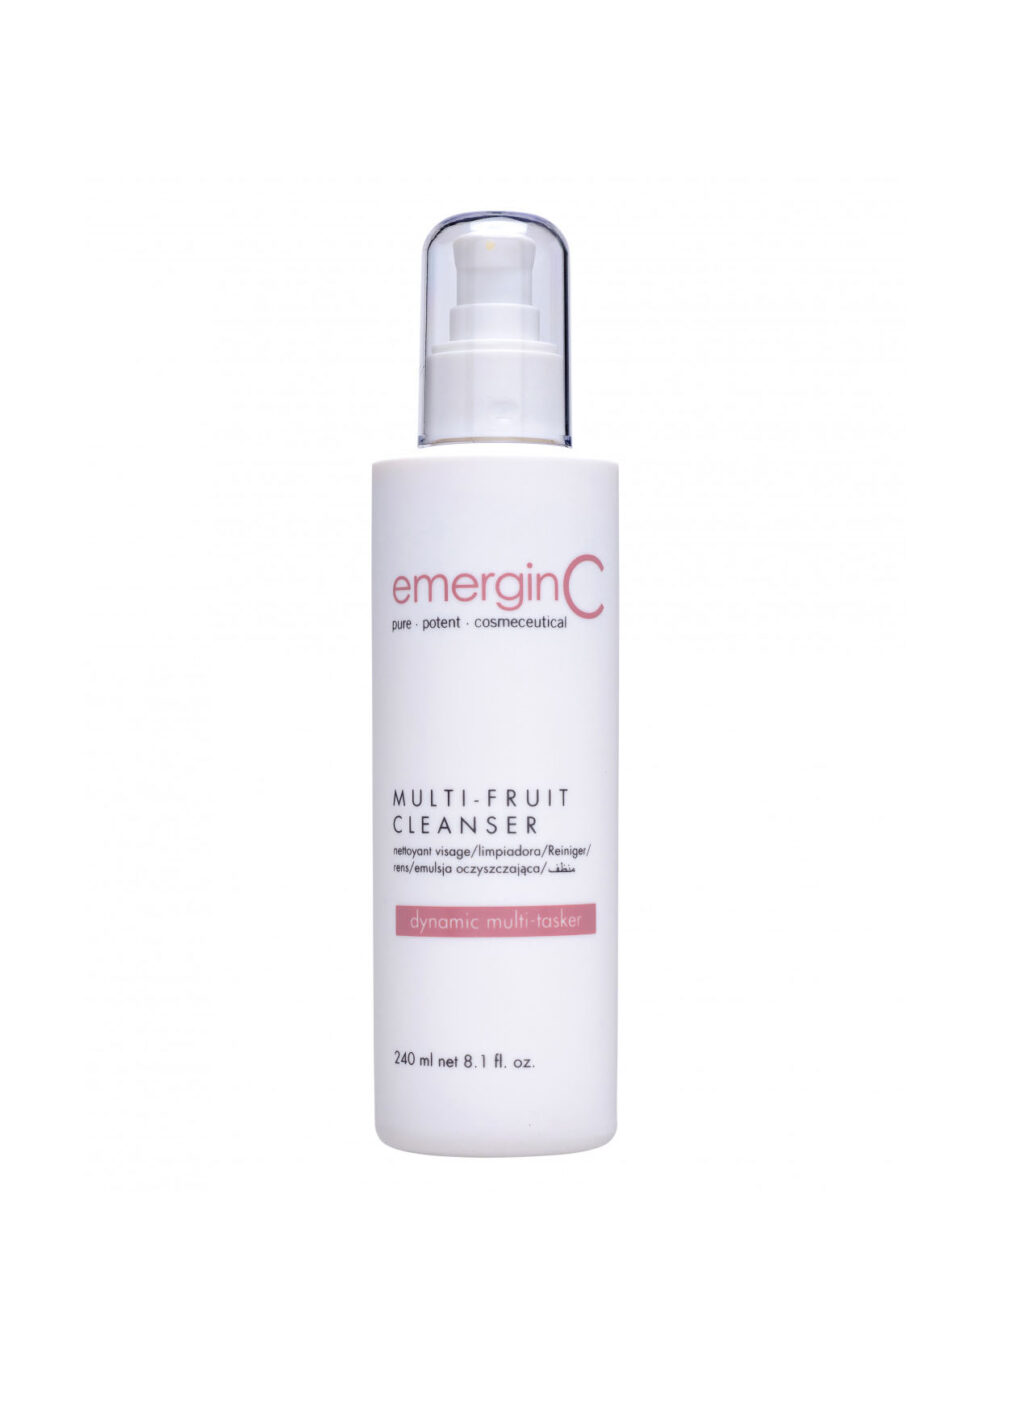 A bottle of emerginc multi-fruit cleanser against a white background.
Product Name: emerginc